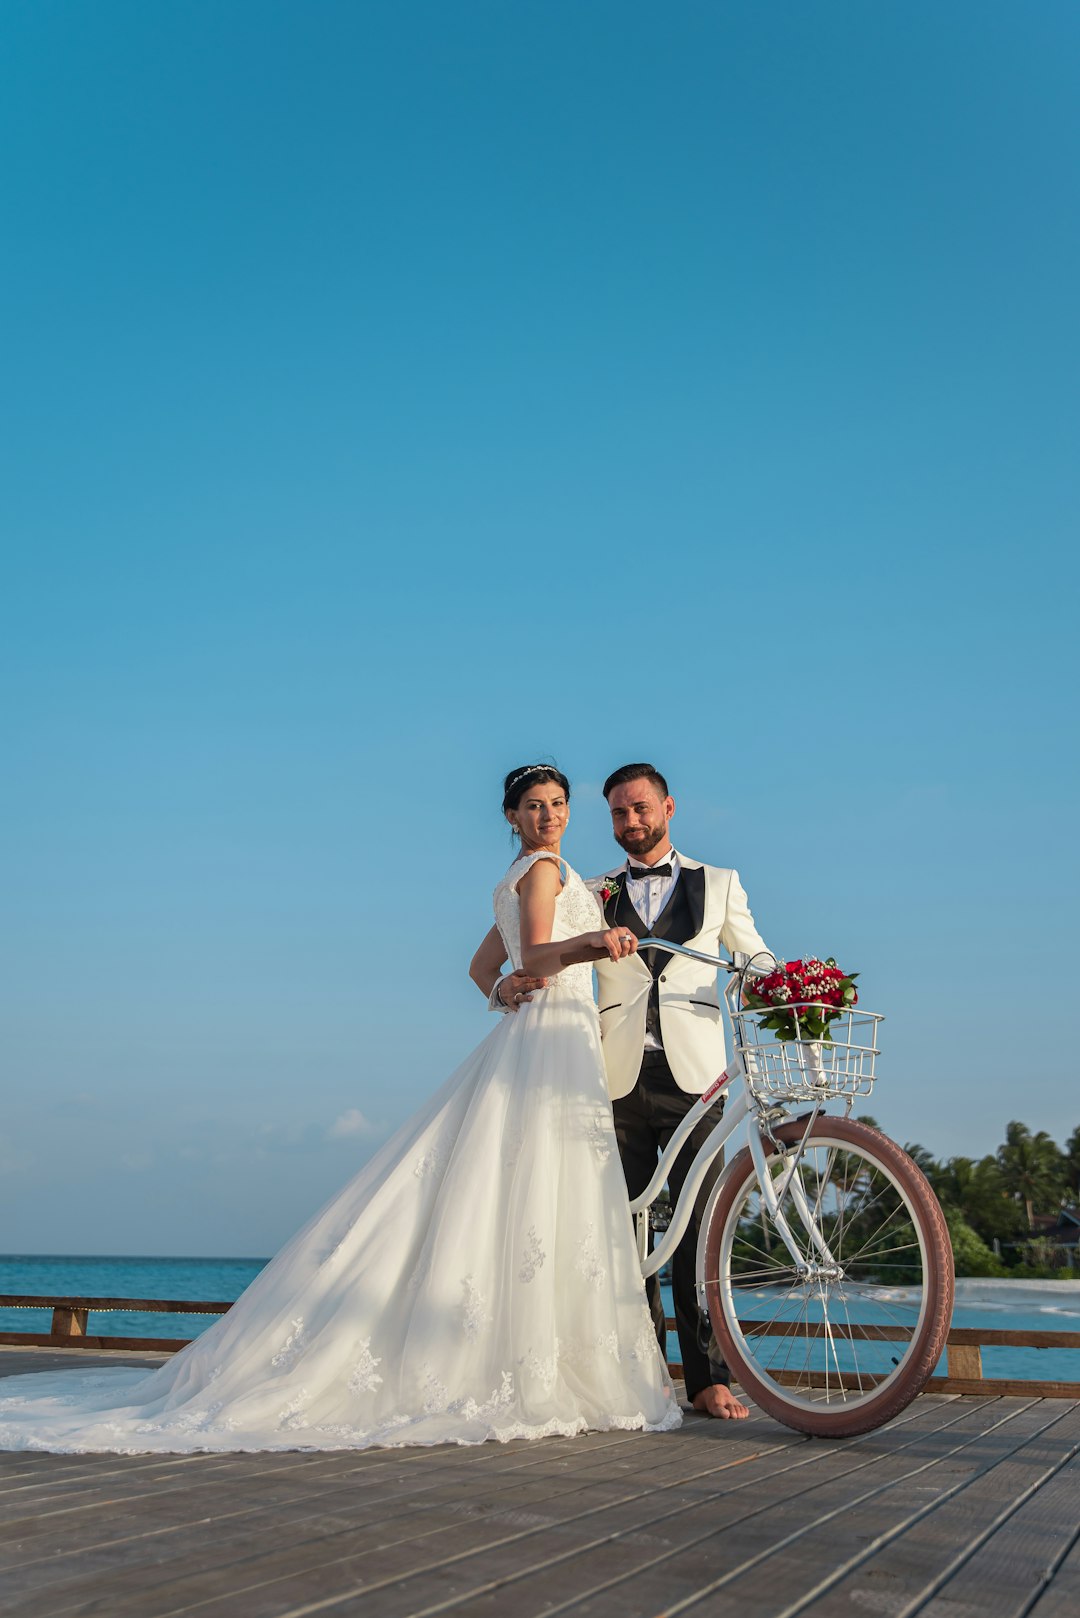 man and woman in wedding dress riding bicycle on beach during daytime